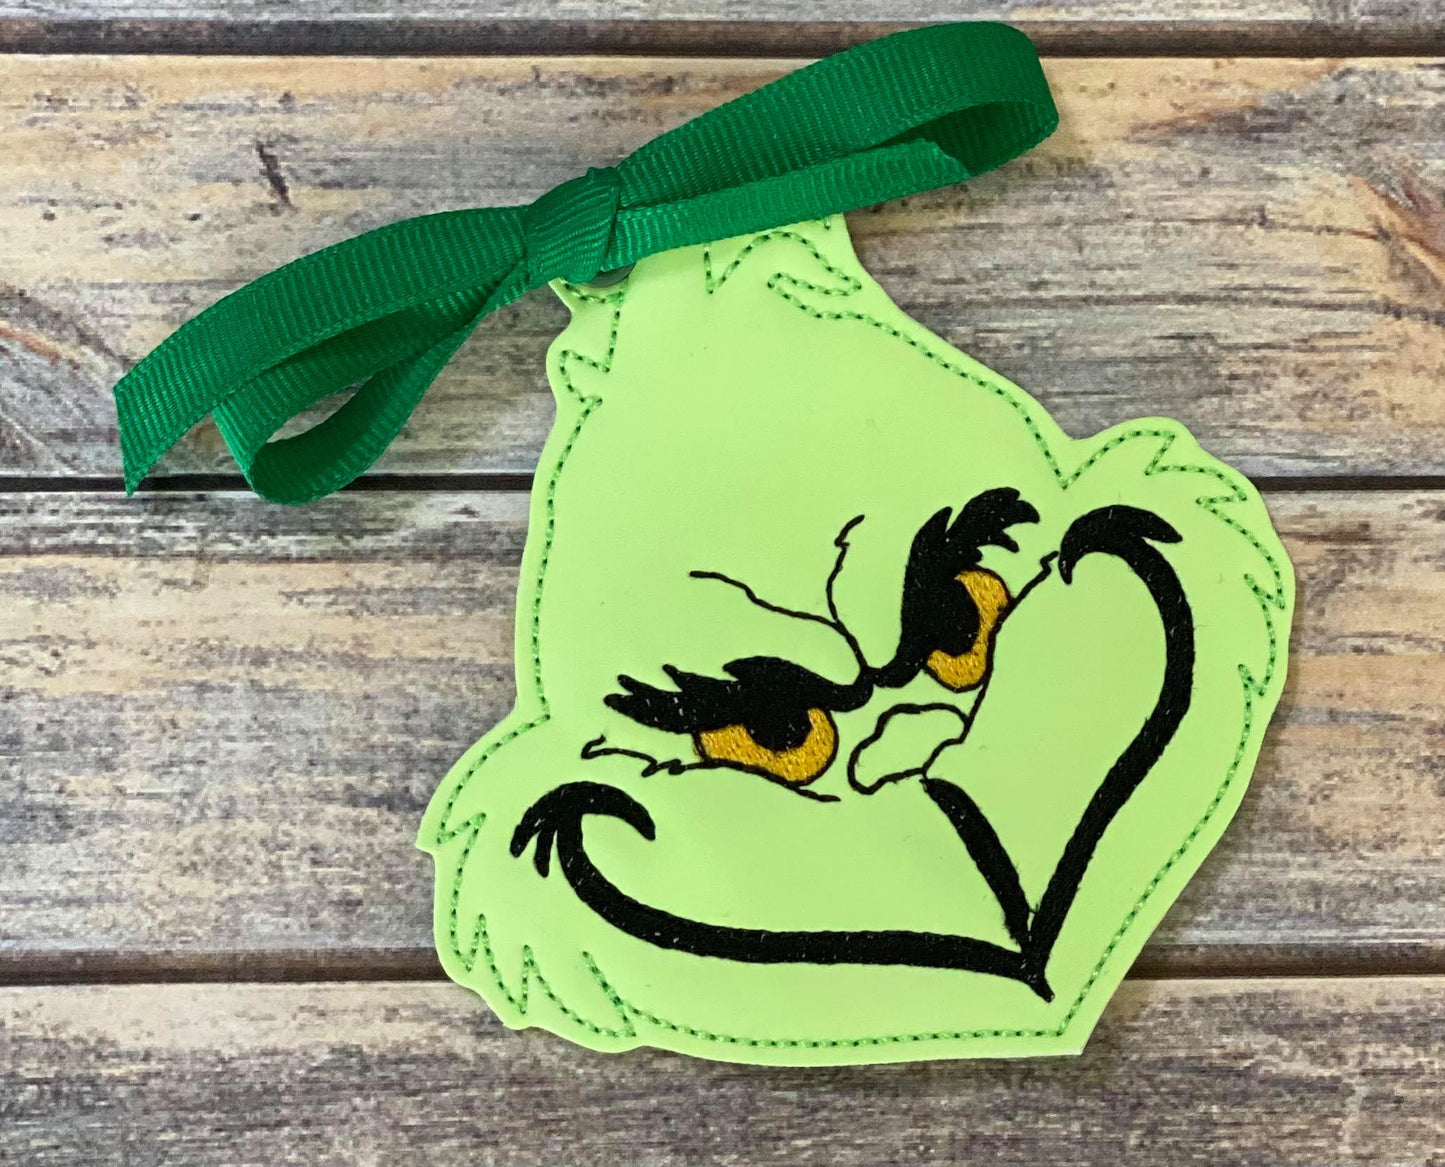 Mean One Ornament - Digital Embroidery Design